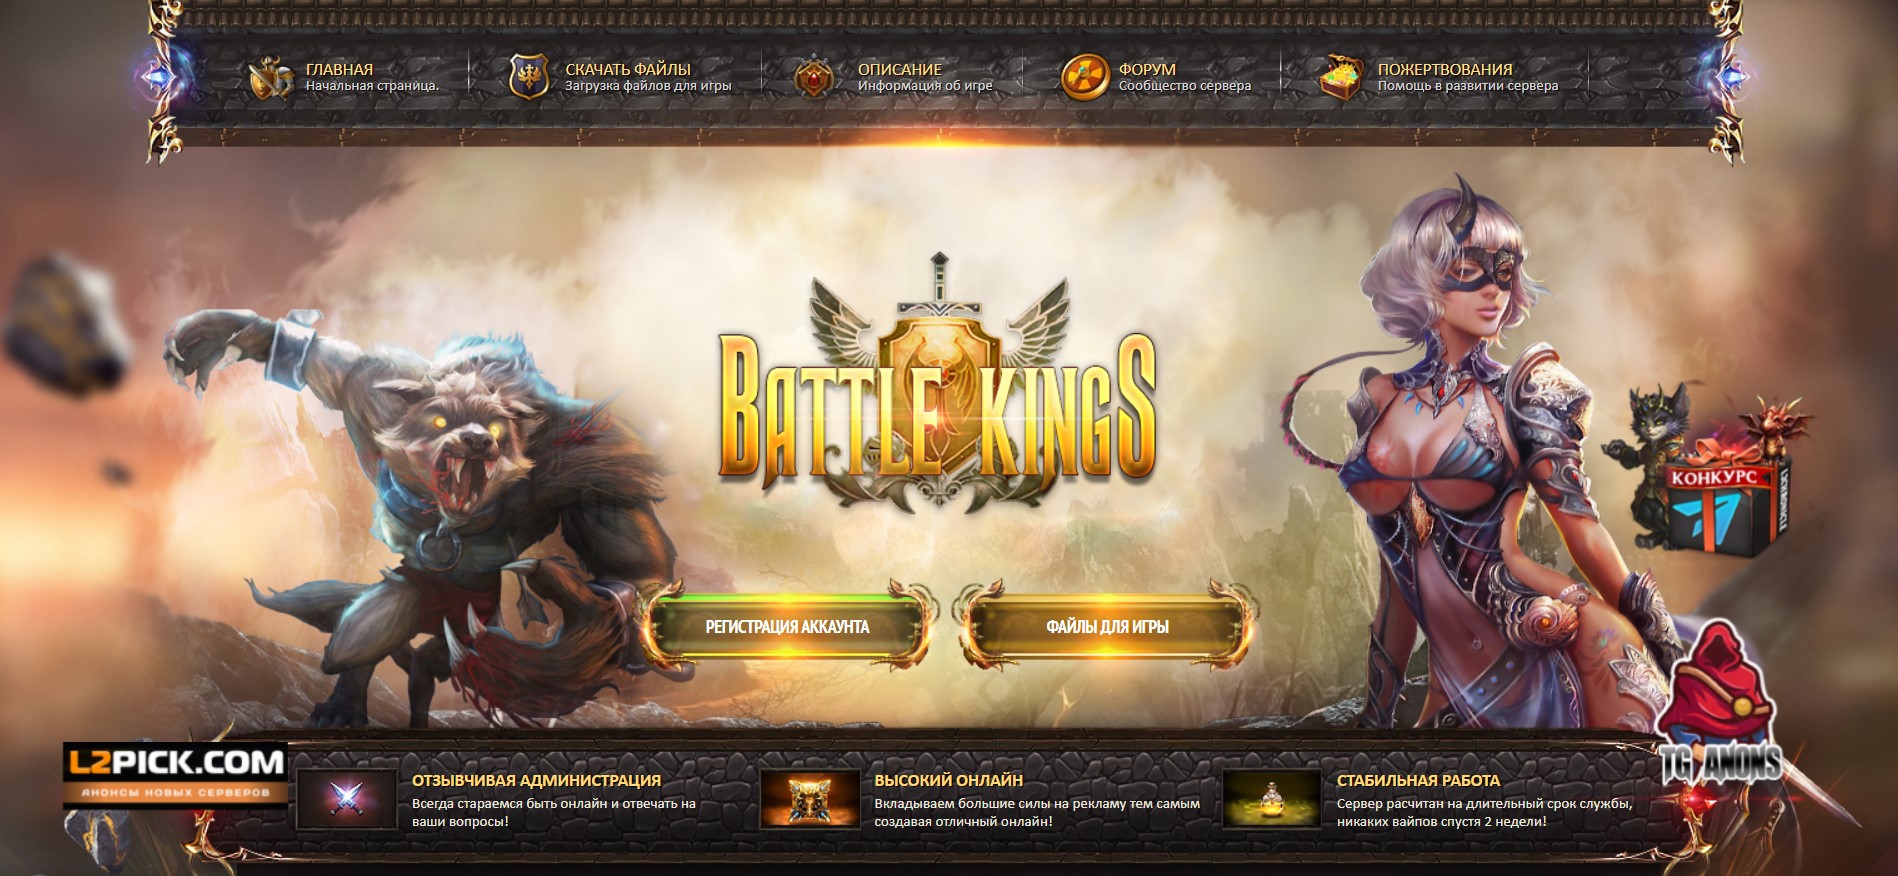 👑 Battle-Kings.fun: Battle Kings in the world of Interlude with unprecedented x100000 rates! Join the epic battle at battle-kings.fun! ⚔️🔥